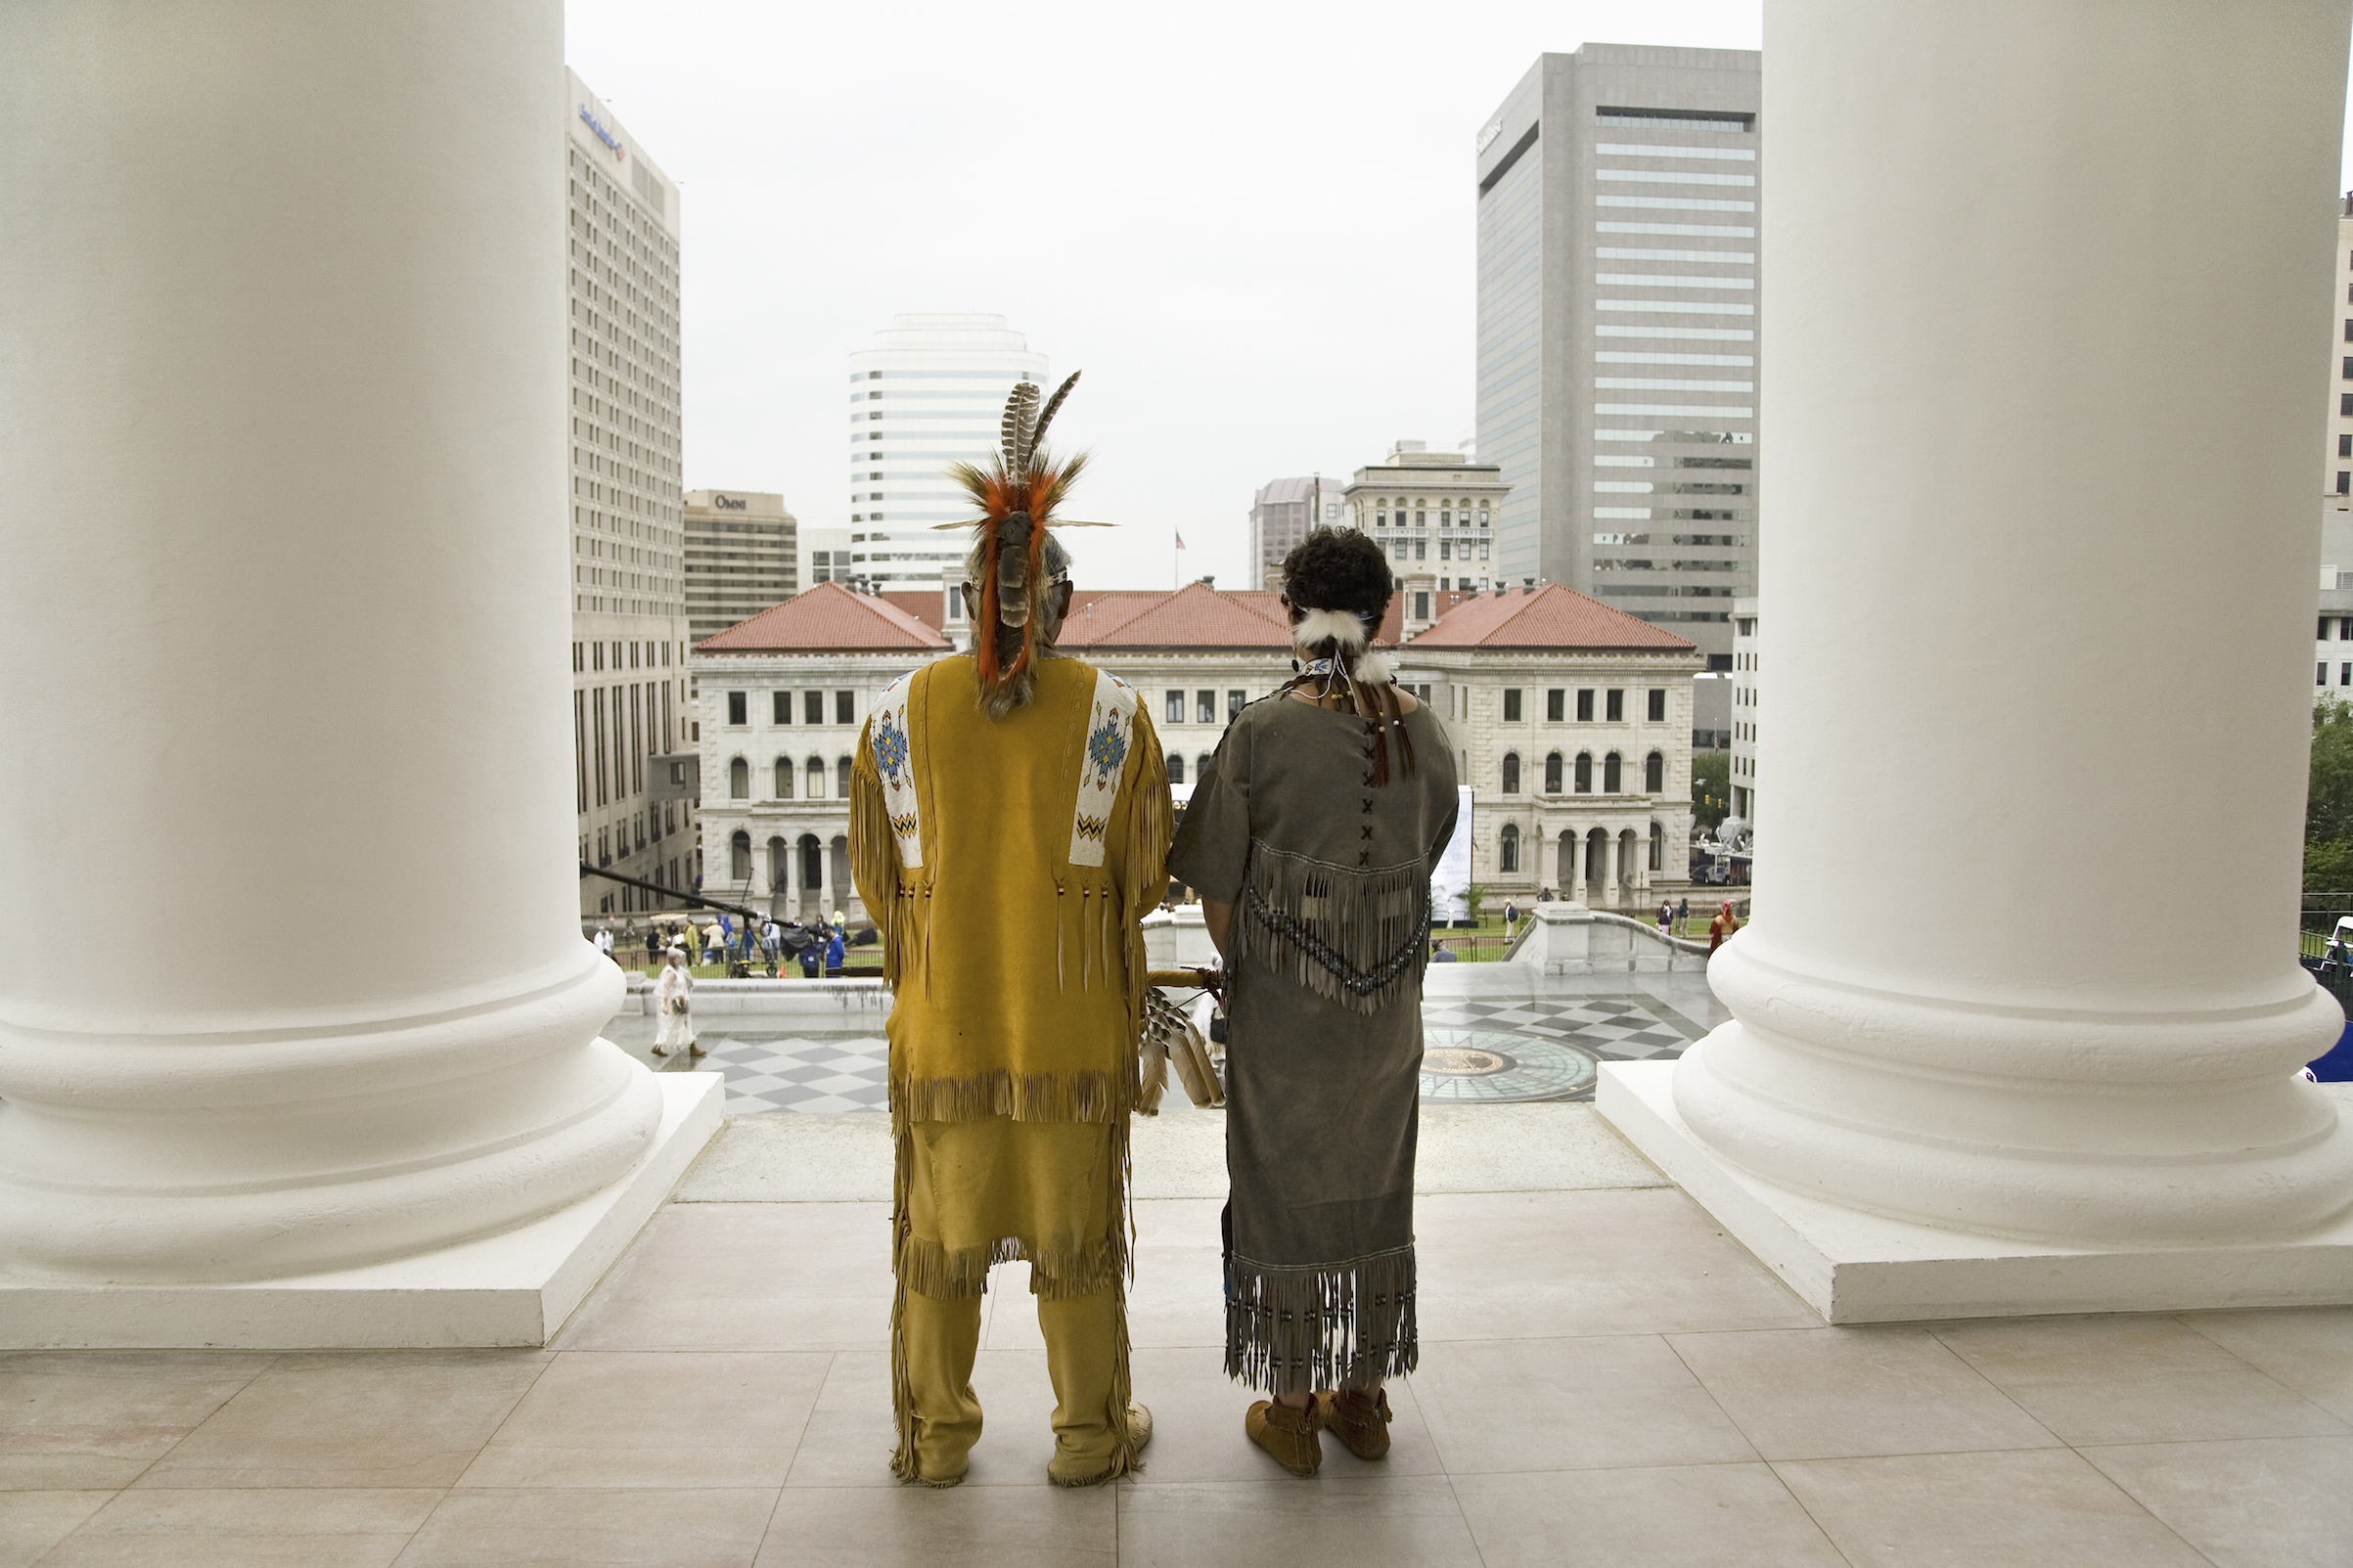 Two Powhatan Tribal members looking over Richmond, Va., from the State Capitol during ceremonies for the 400th Anniversary of the Jamestown Settlement on May 3, 2007. (Joseph Sohm—UIG via Getty Images)